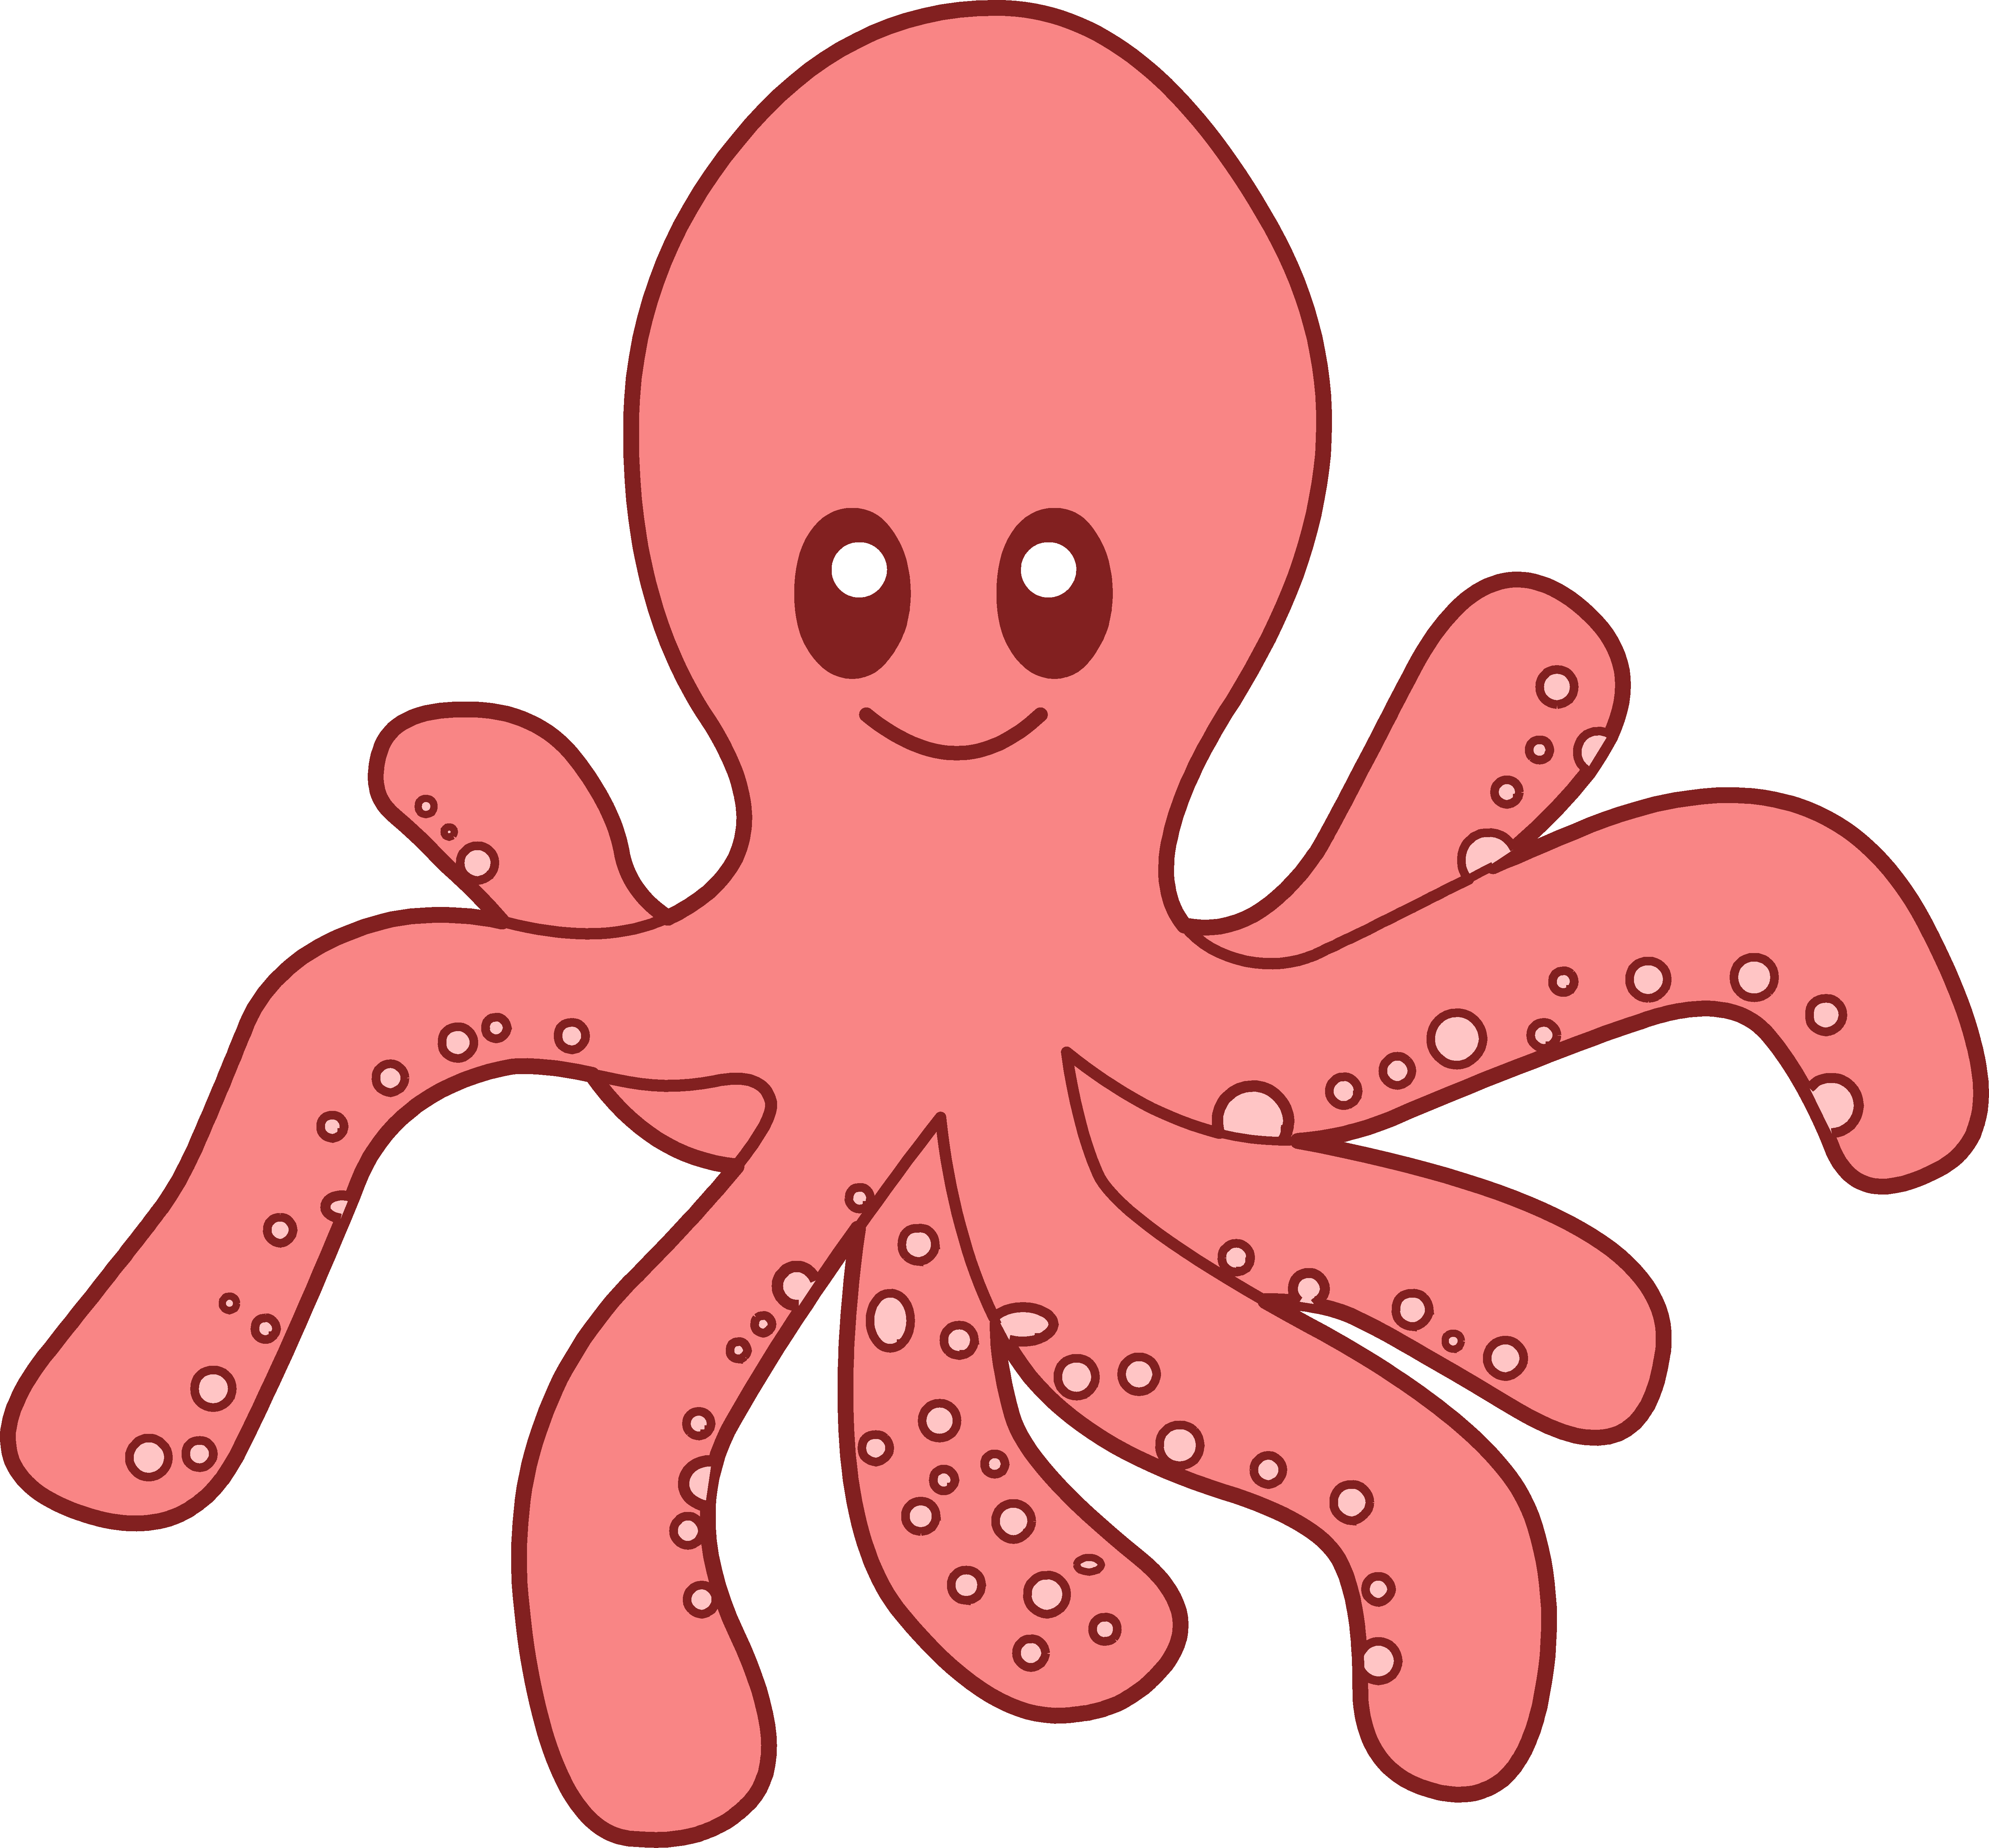 Cute Octopus Cartoon Drawing Images & Pictures - Becuo